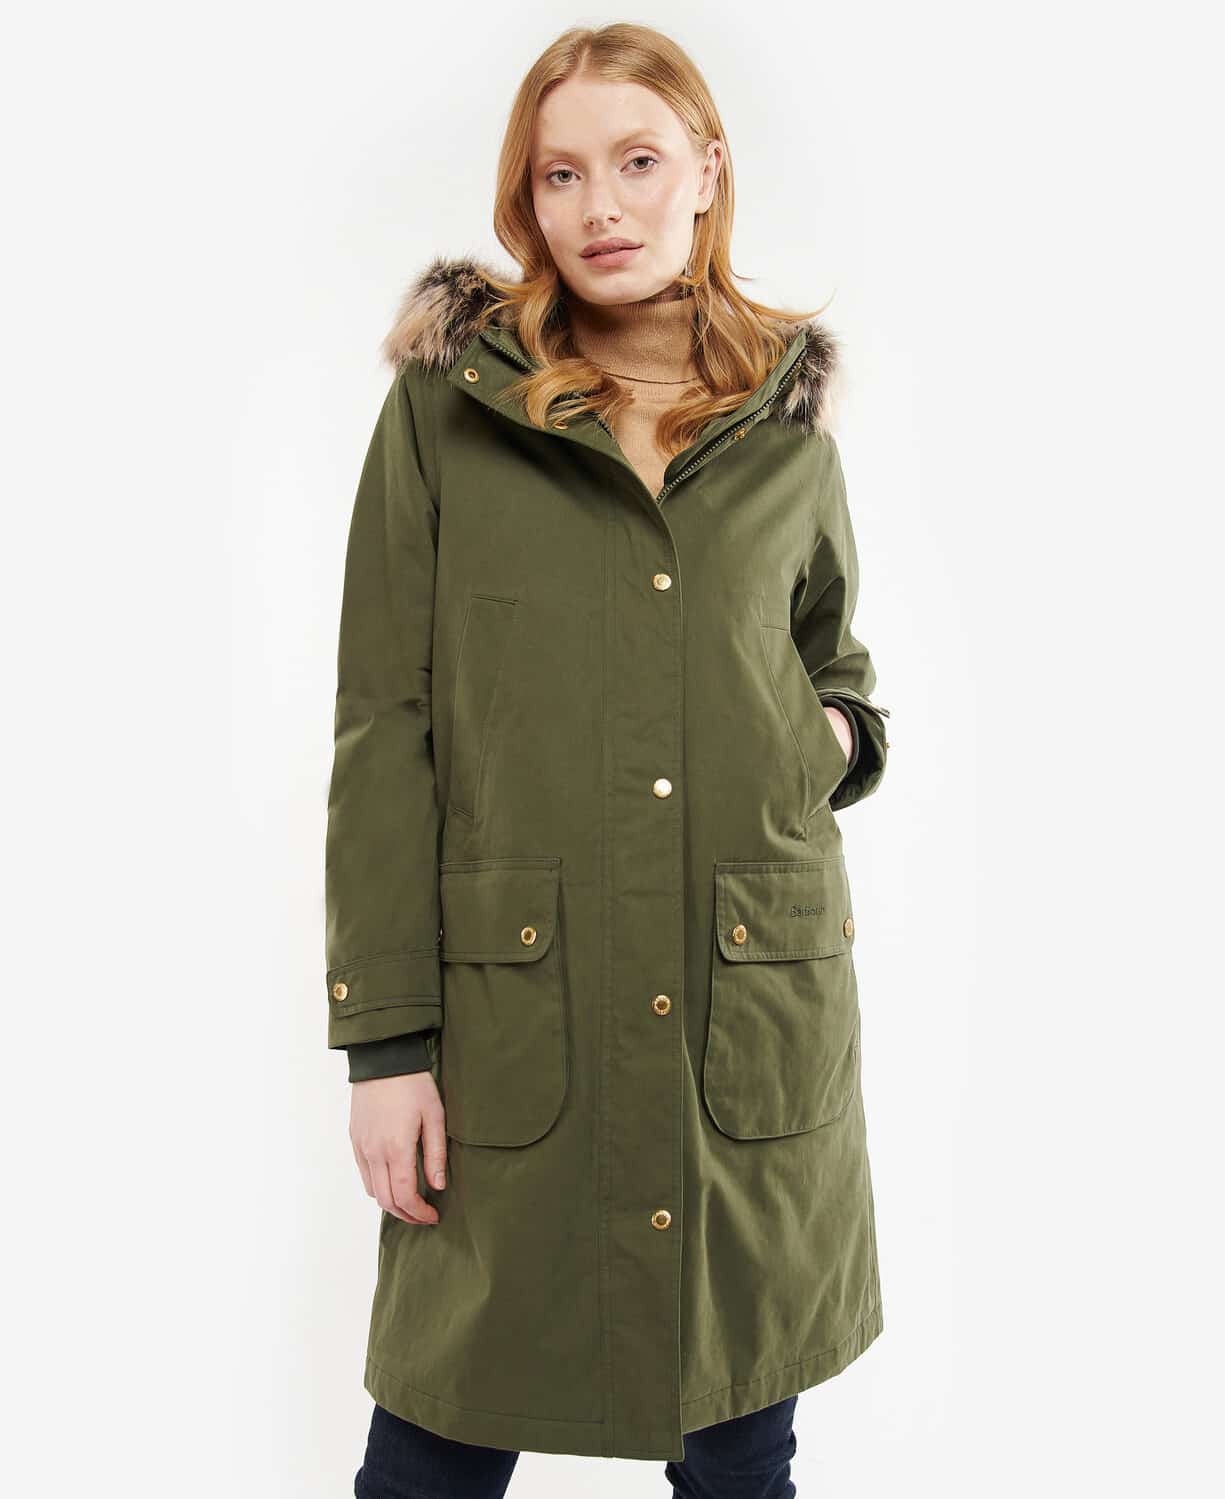 Scarlet Jacket in Olive - Out and About